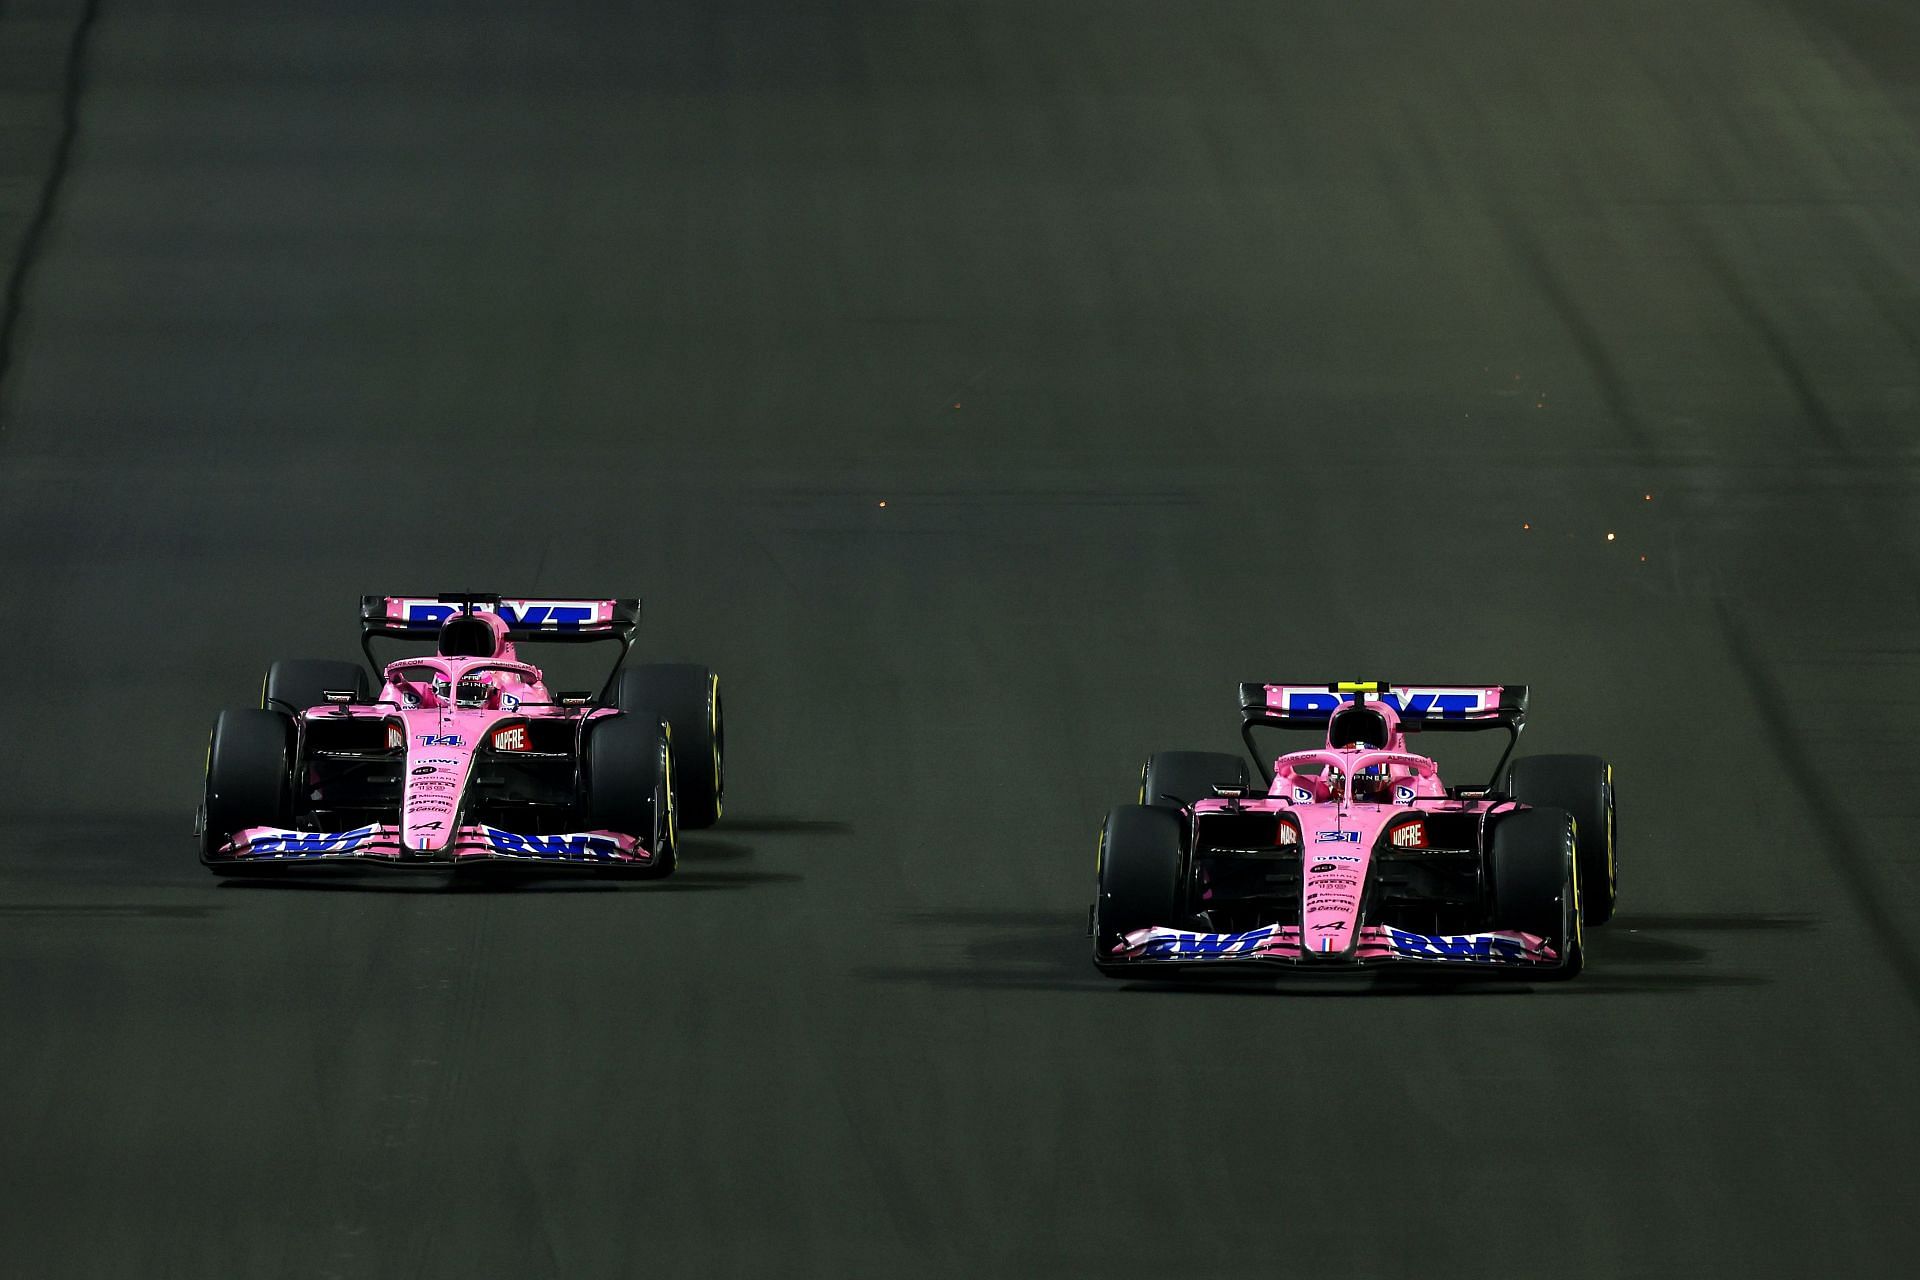 The battle between Esteban Ocon and Fernando Alonso was the highlight of the race